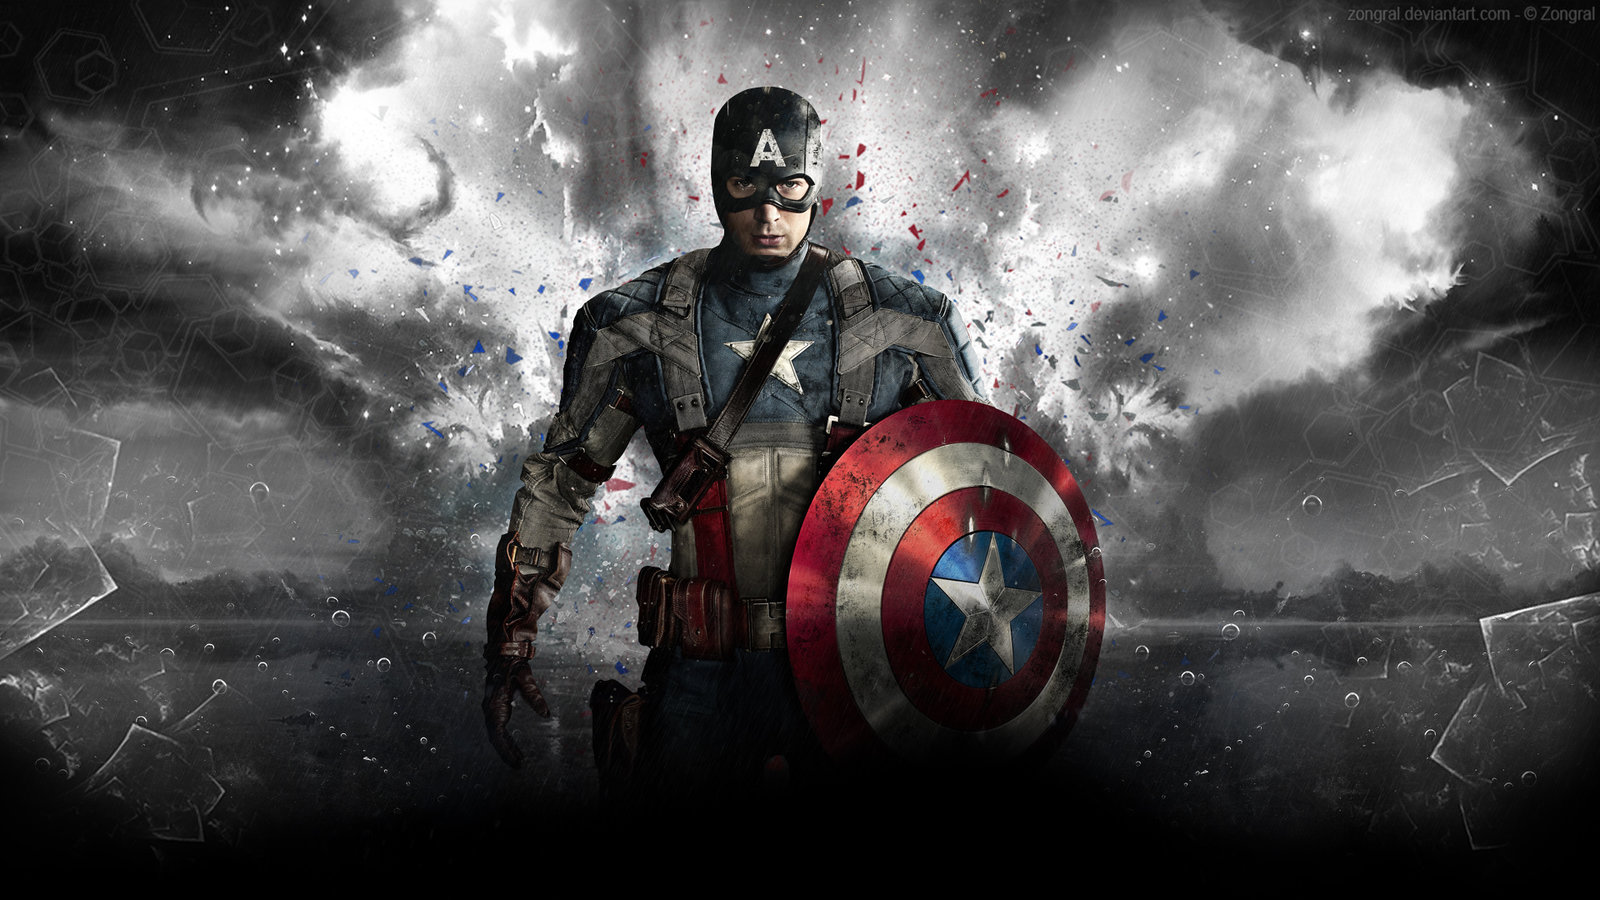 Image Captain America Strong 17575 Wallpaper High Resolution